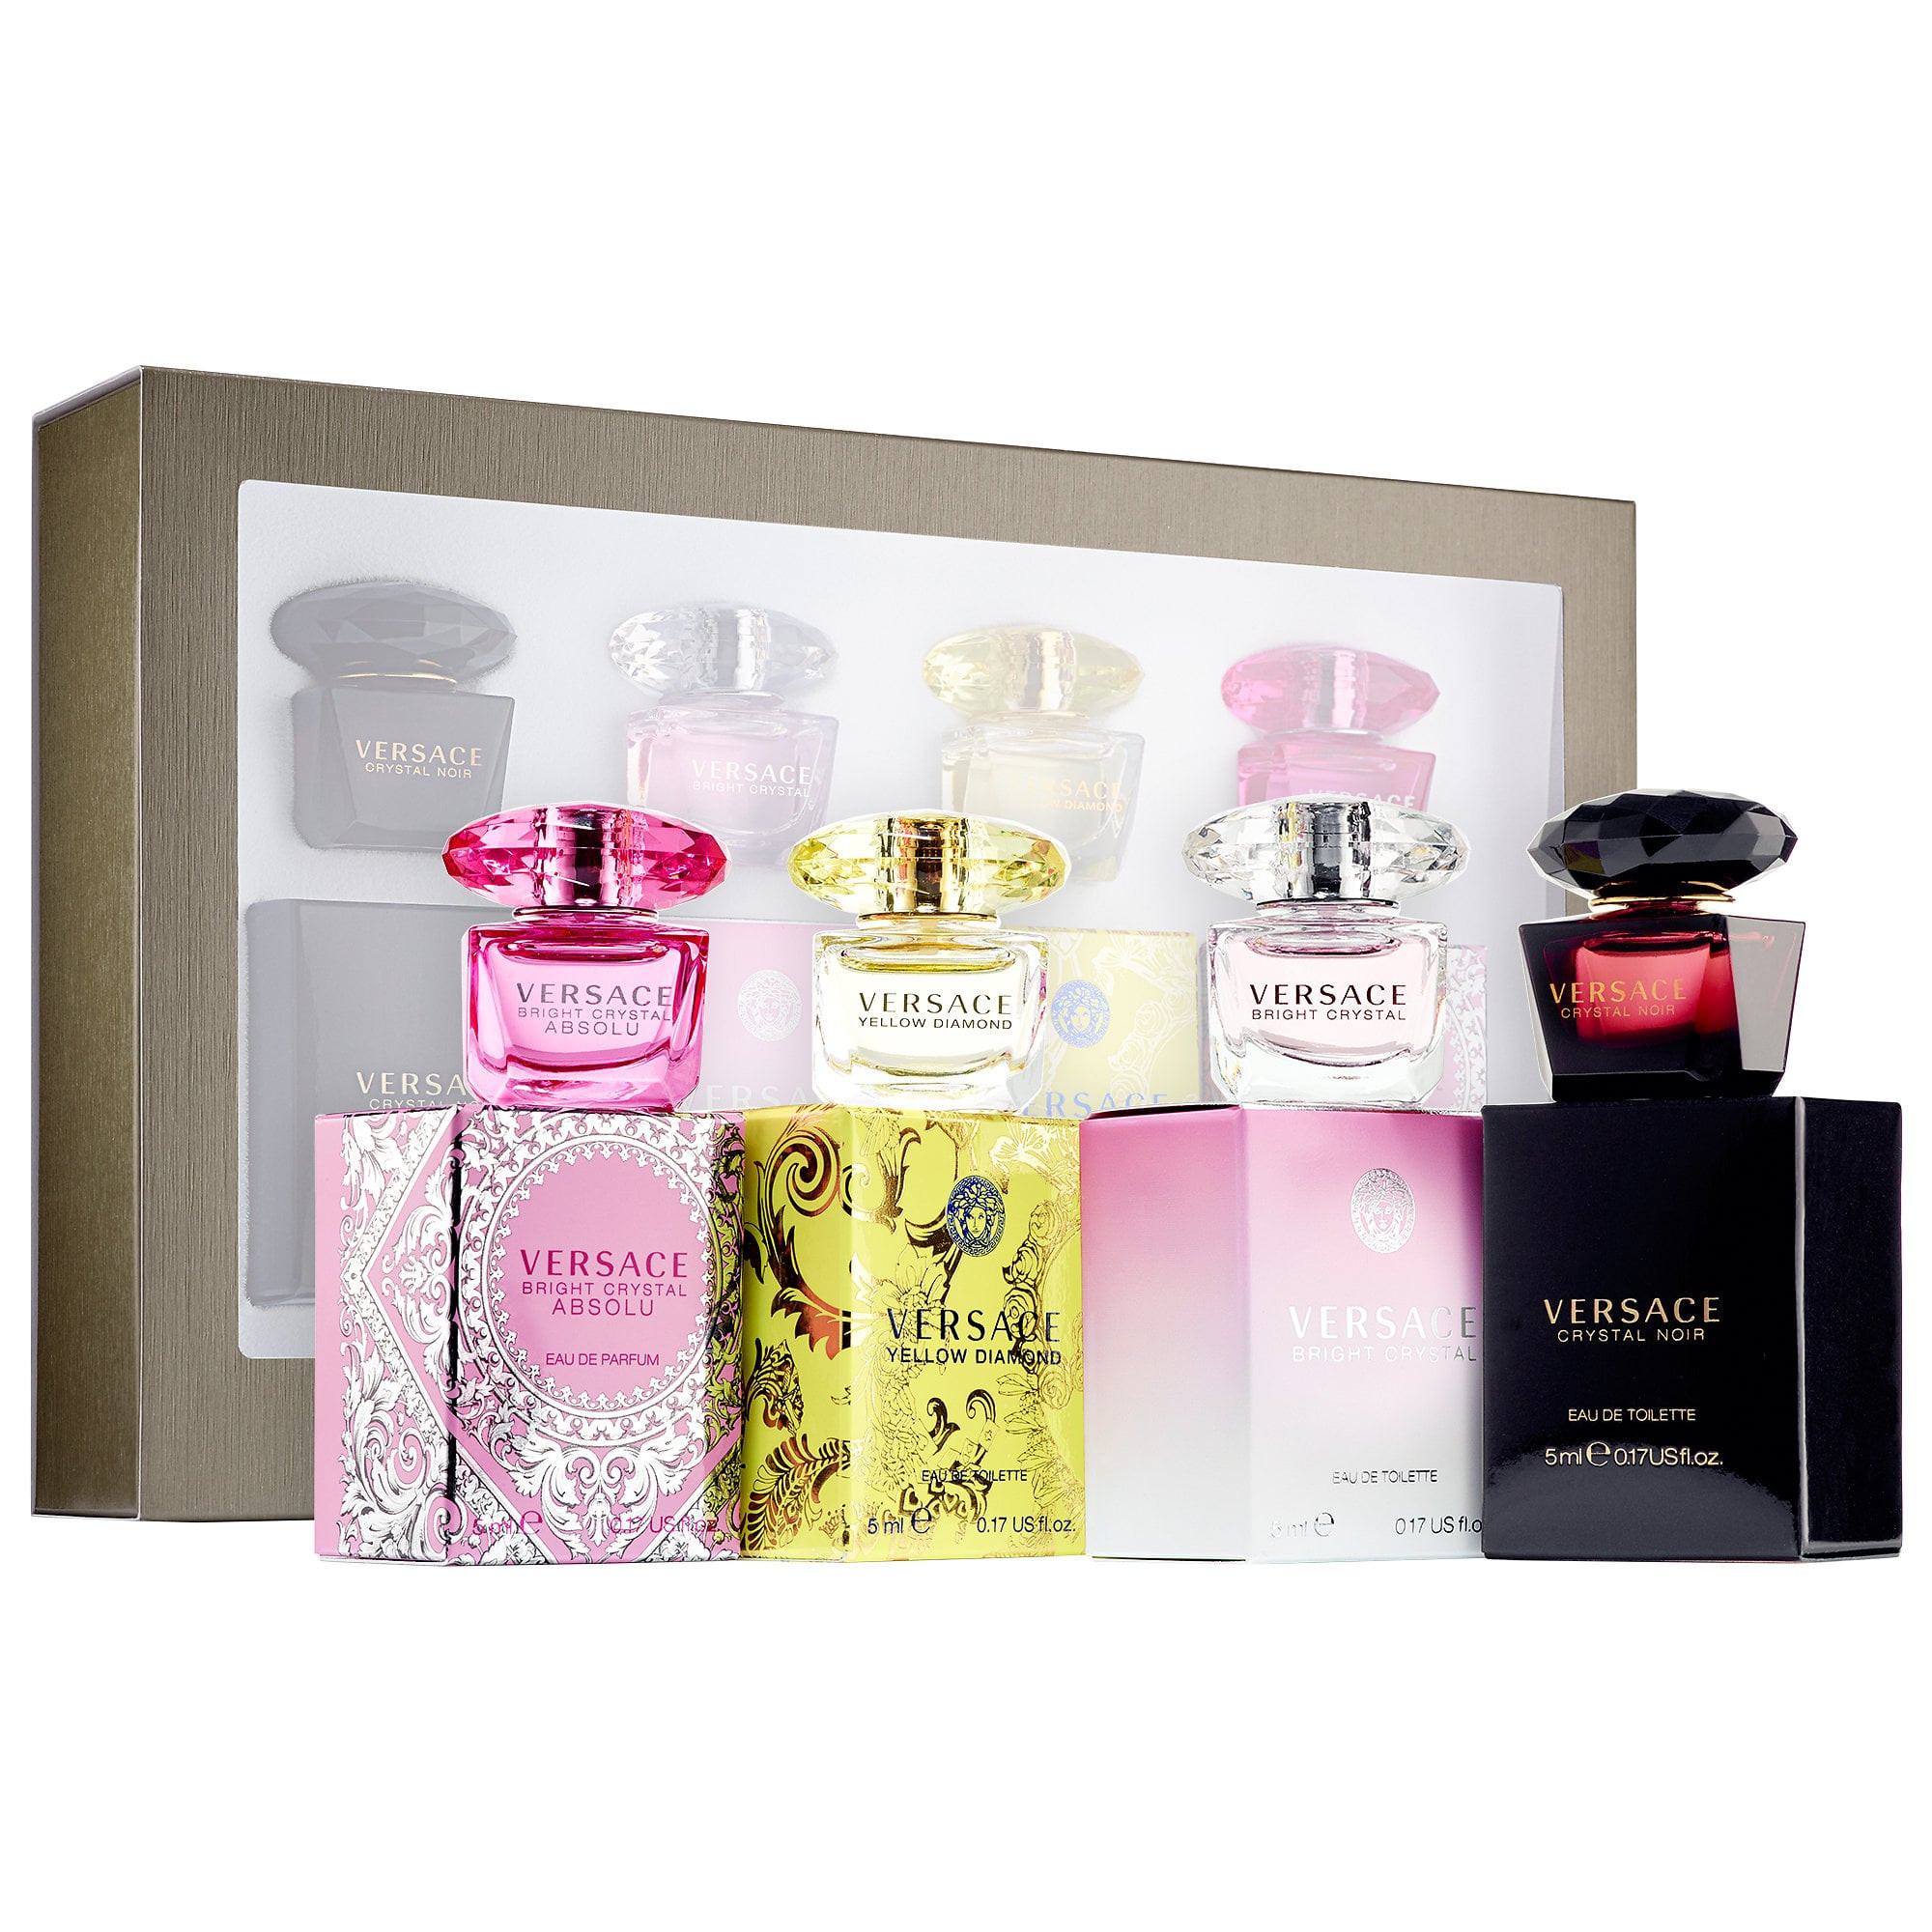 Top Holiday Gift Ideas 2020
 Best Holiday Gift Ideas s Fragrance Perfume Trend